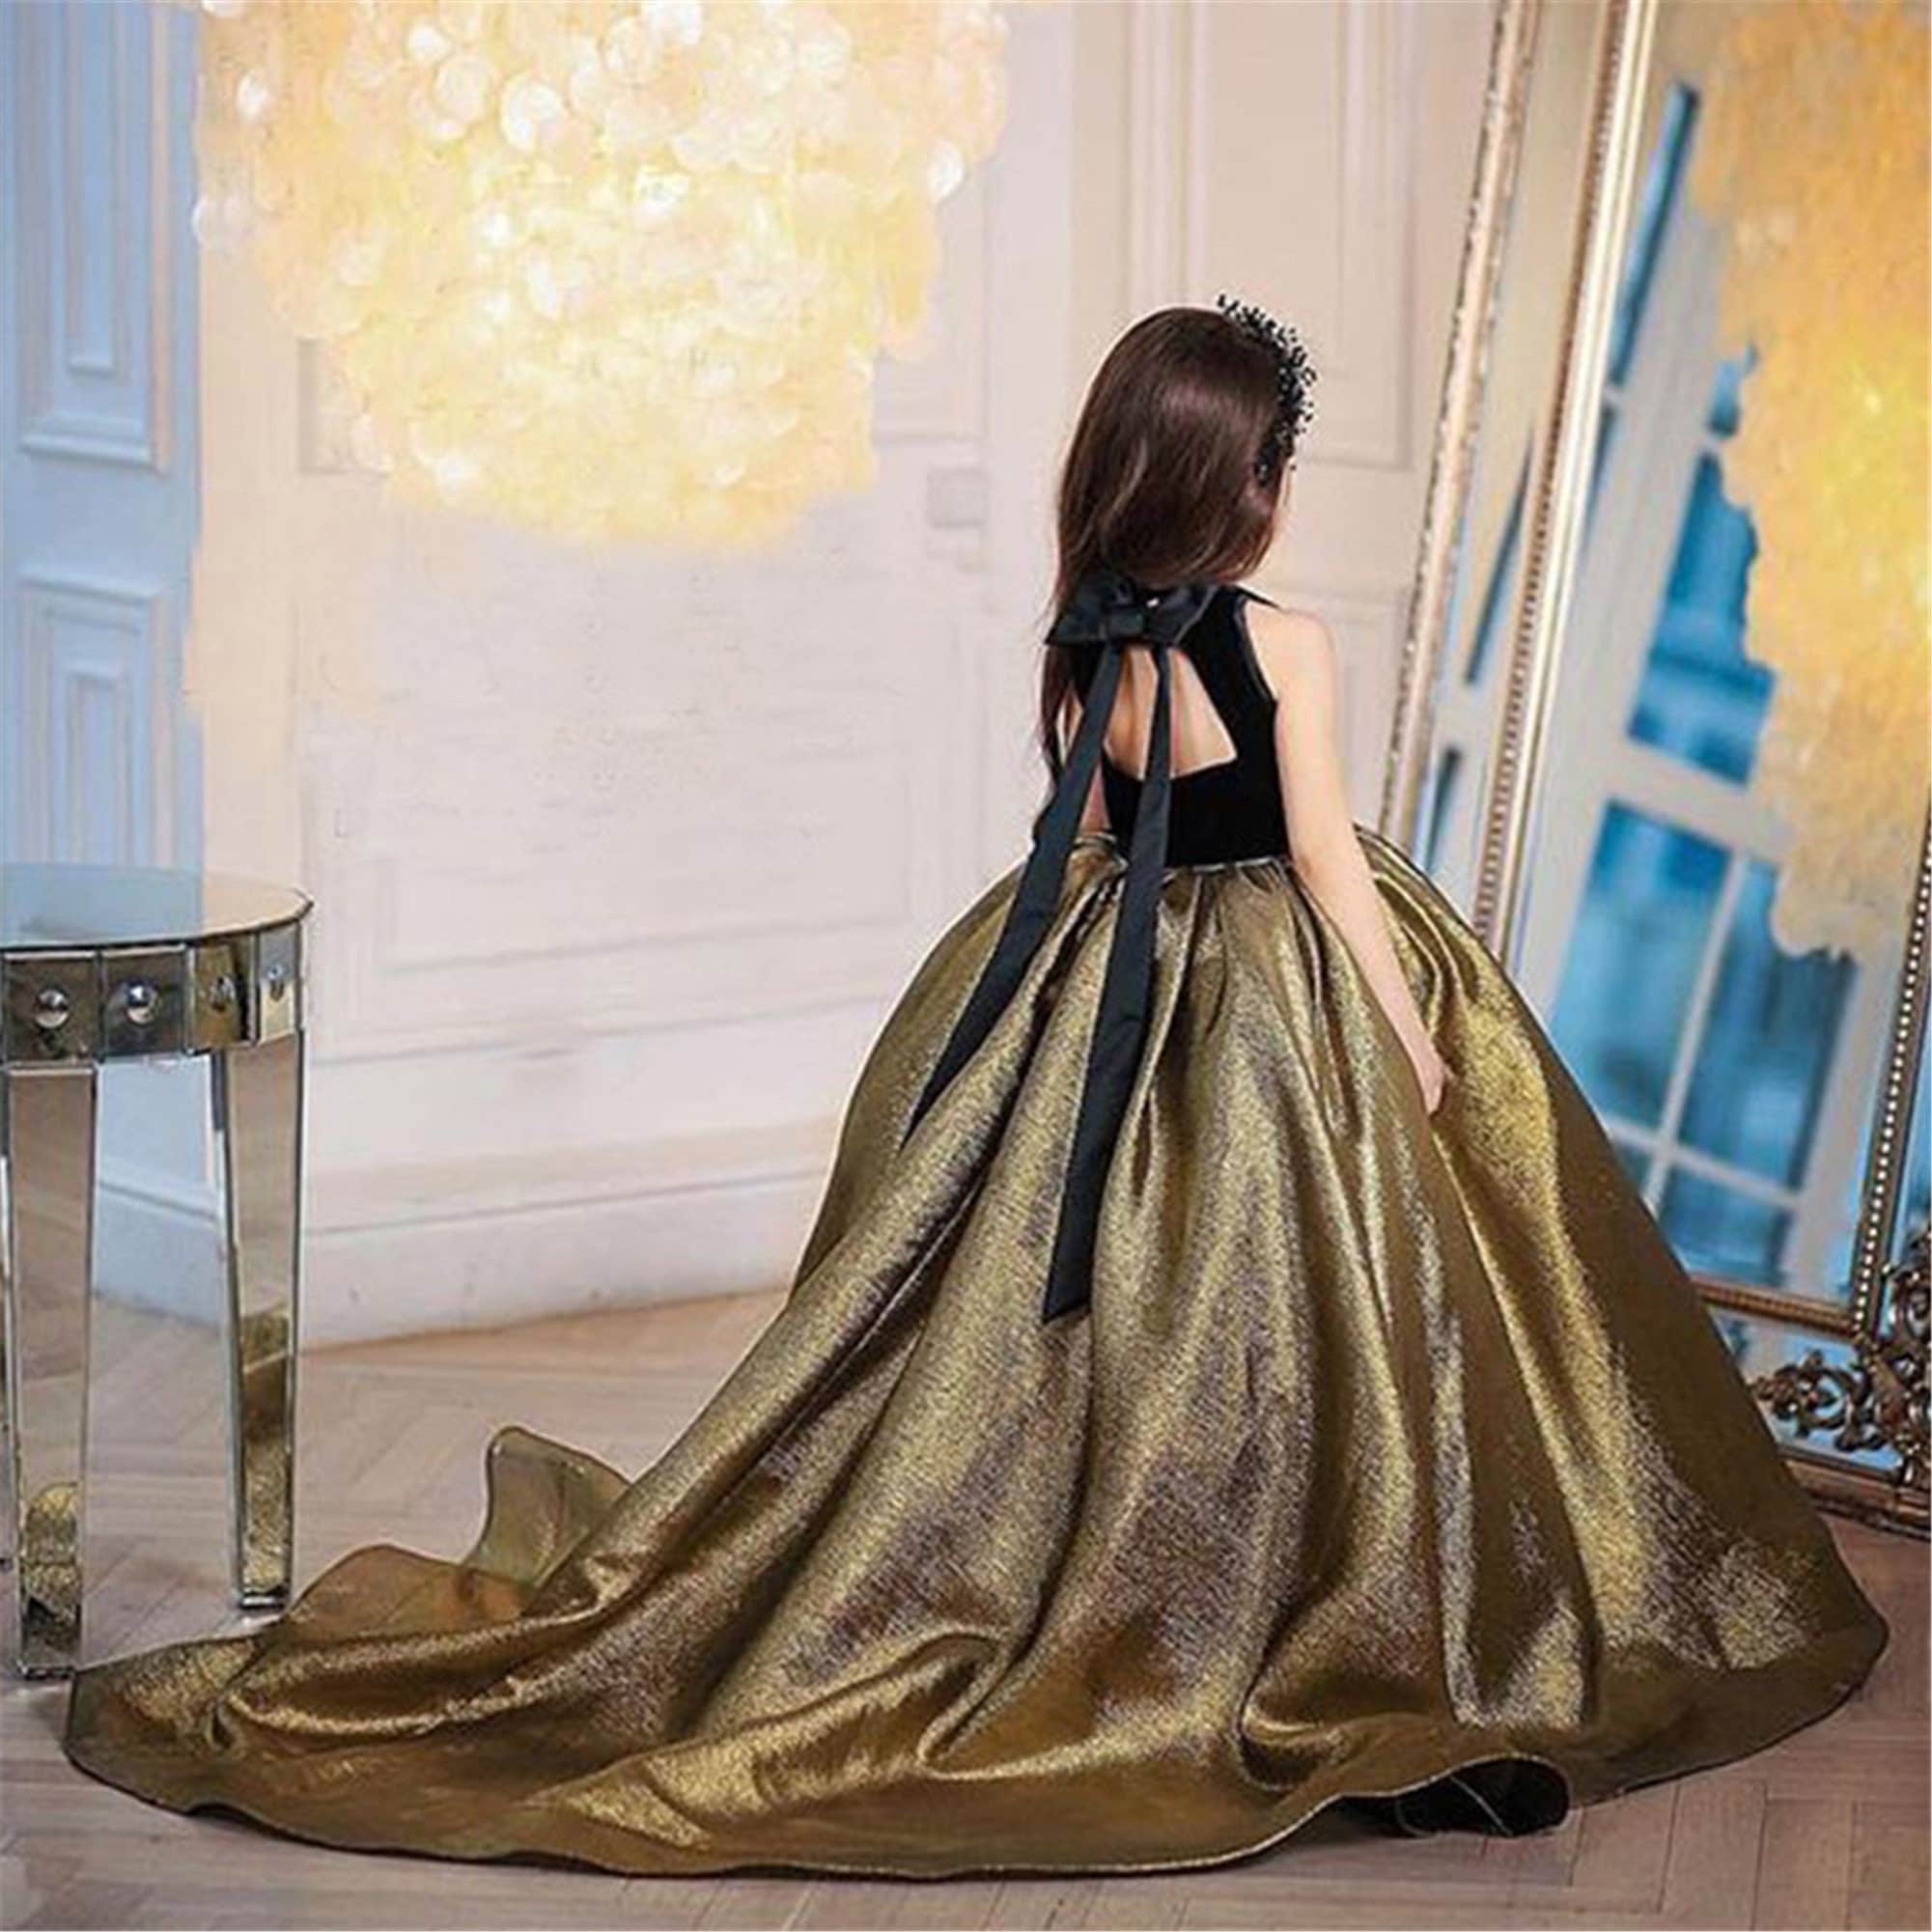 Black and Gold Glittering Long Dress Girl Birthday Gown Kids Piano Costume  Flower Girl Dress Backless Occasion Tutu Party Dress With Train - Etsy